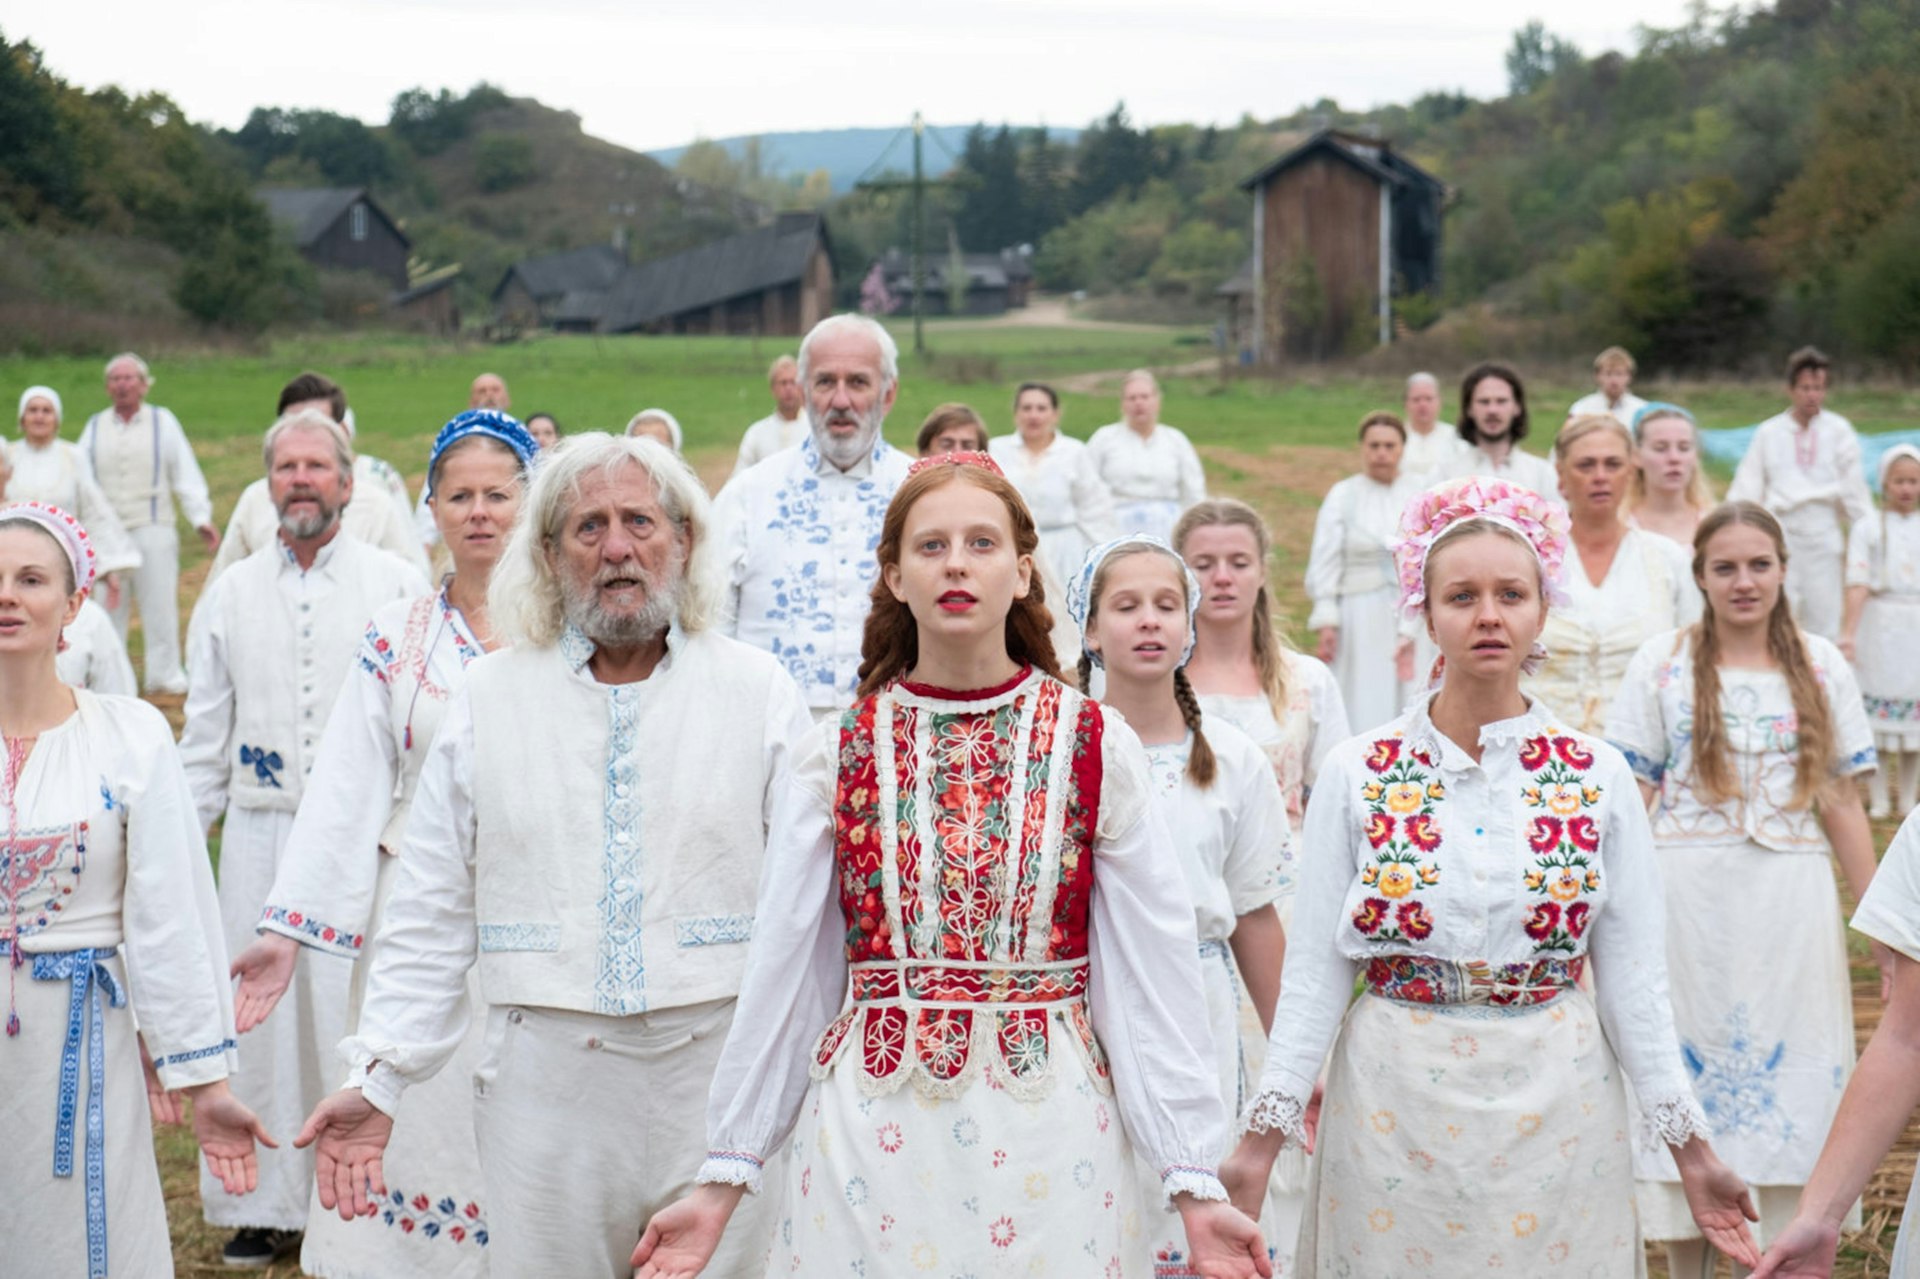 A still of actors in traditional Swedish folk costumes from the film “Midsommar” (2019)